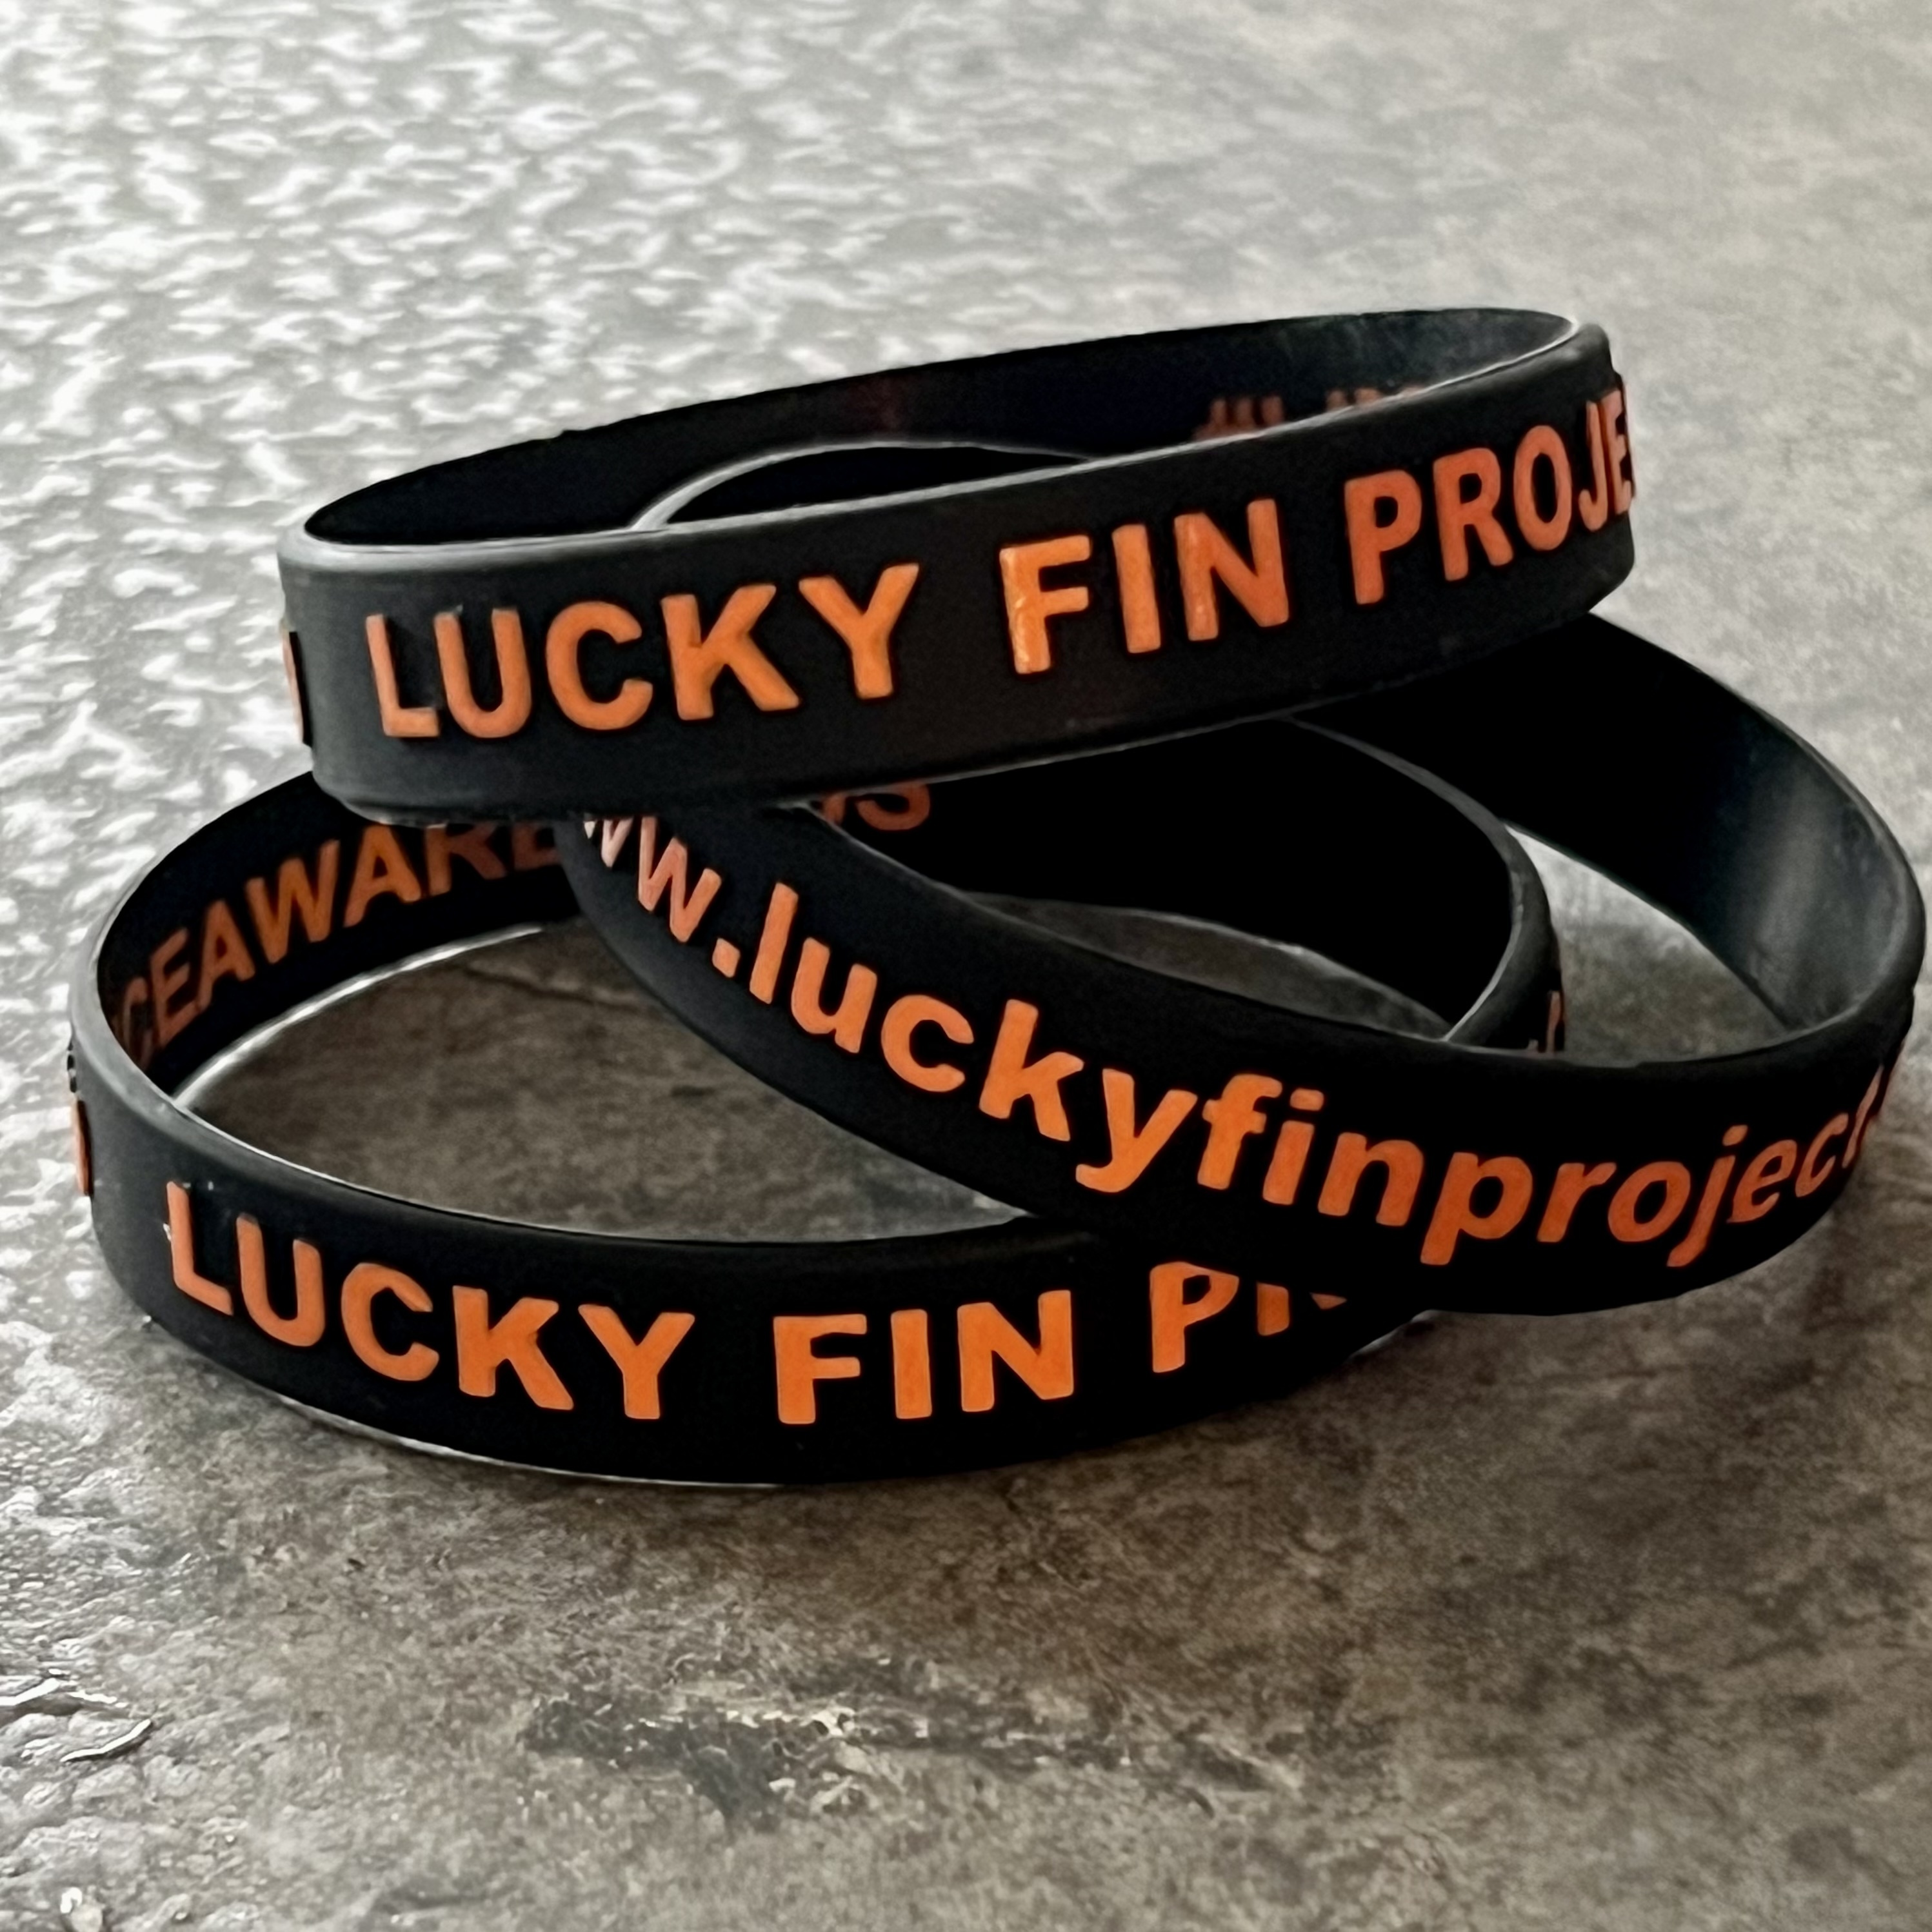 *NEW* Lucky Fin Project Wristband